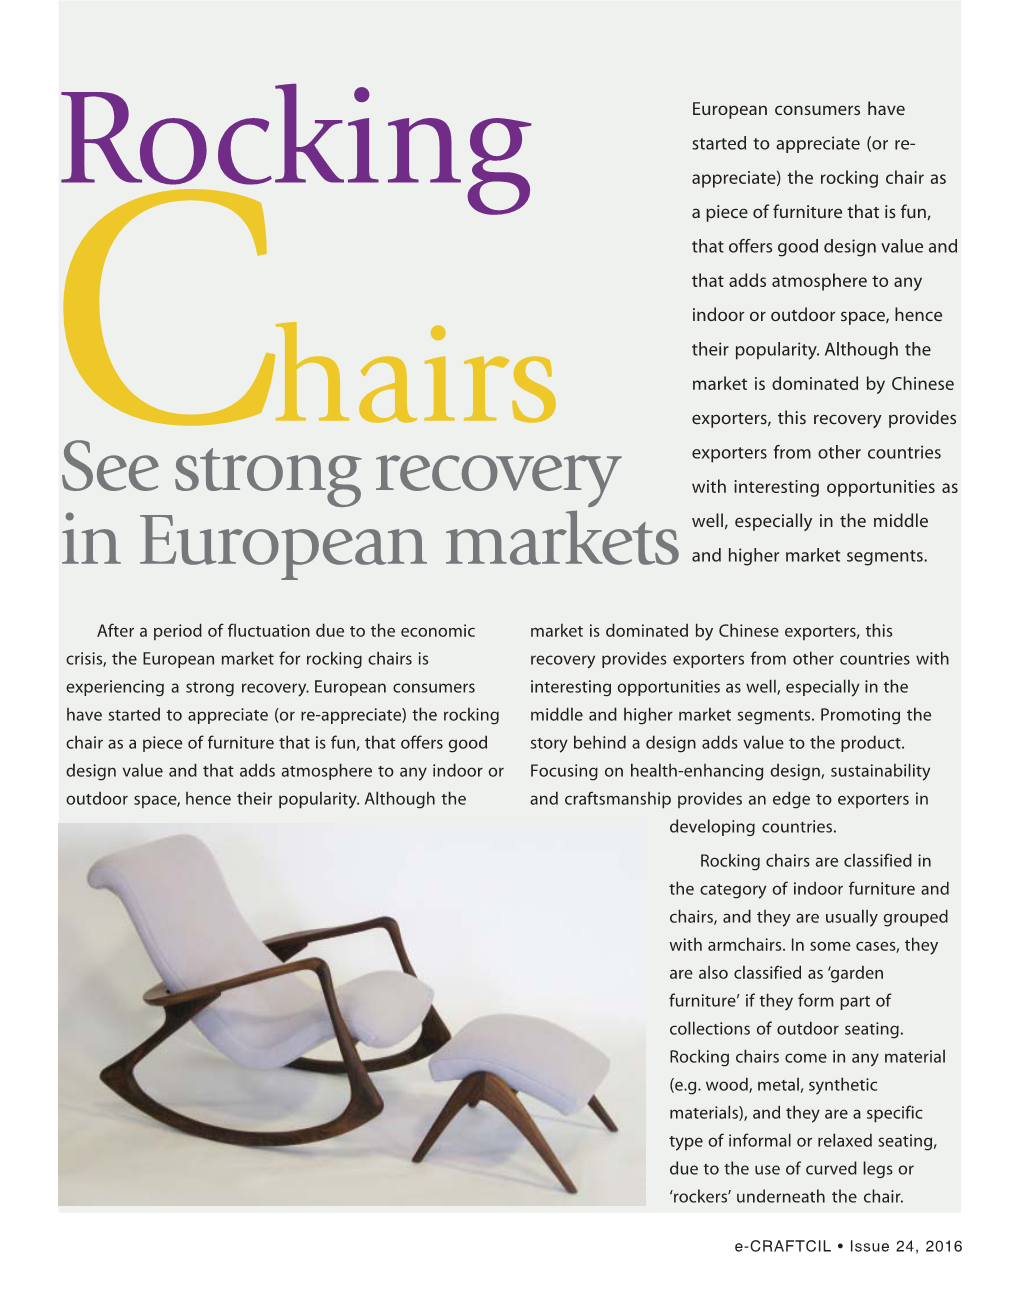 Rocking Chairs Is Recovery Provides Exporters from Other Countries with Experiencing a Strong Recovery